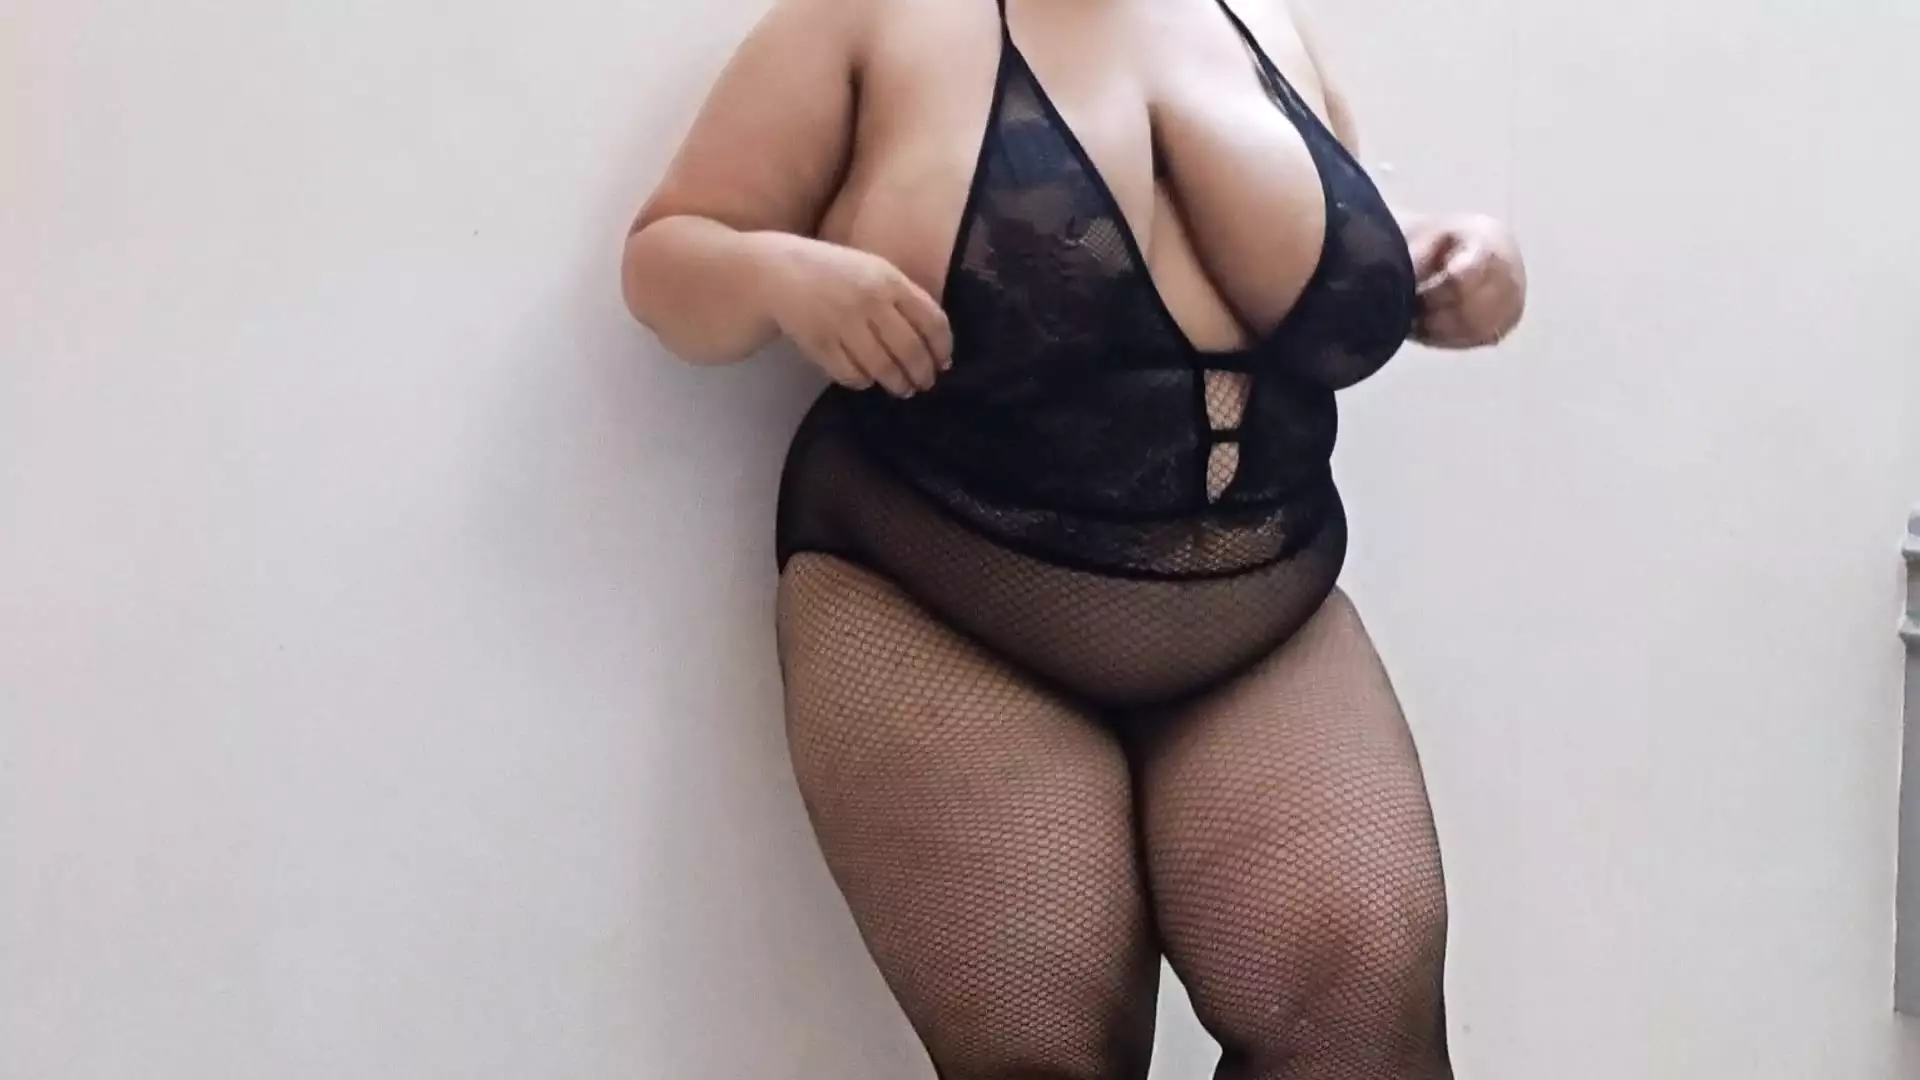 Indian Chubby Bbw Does Cam Show In Fishnet Lingerie